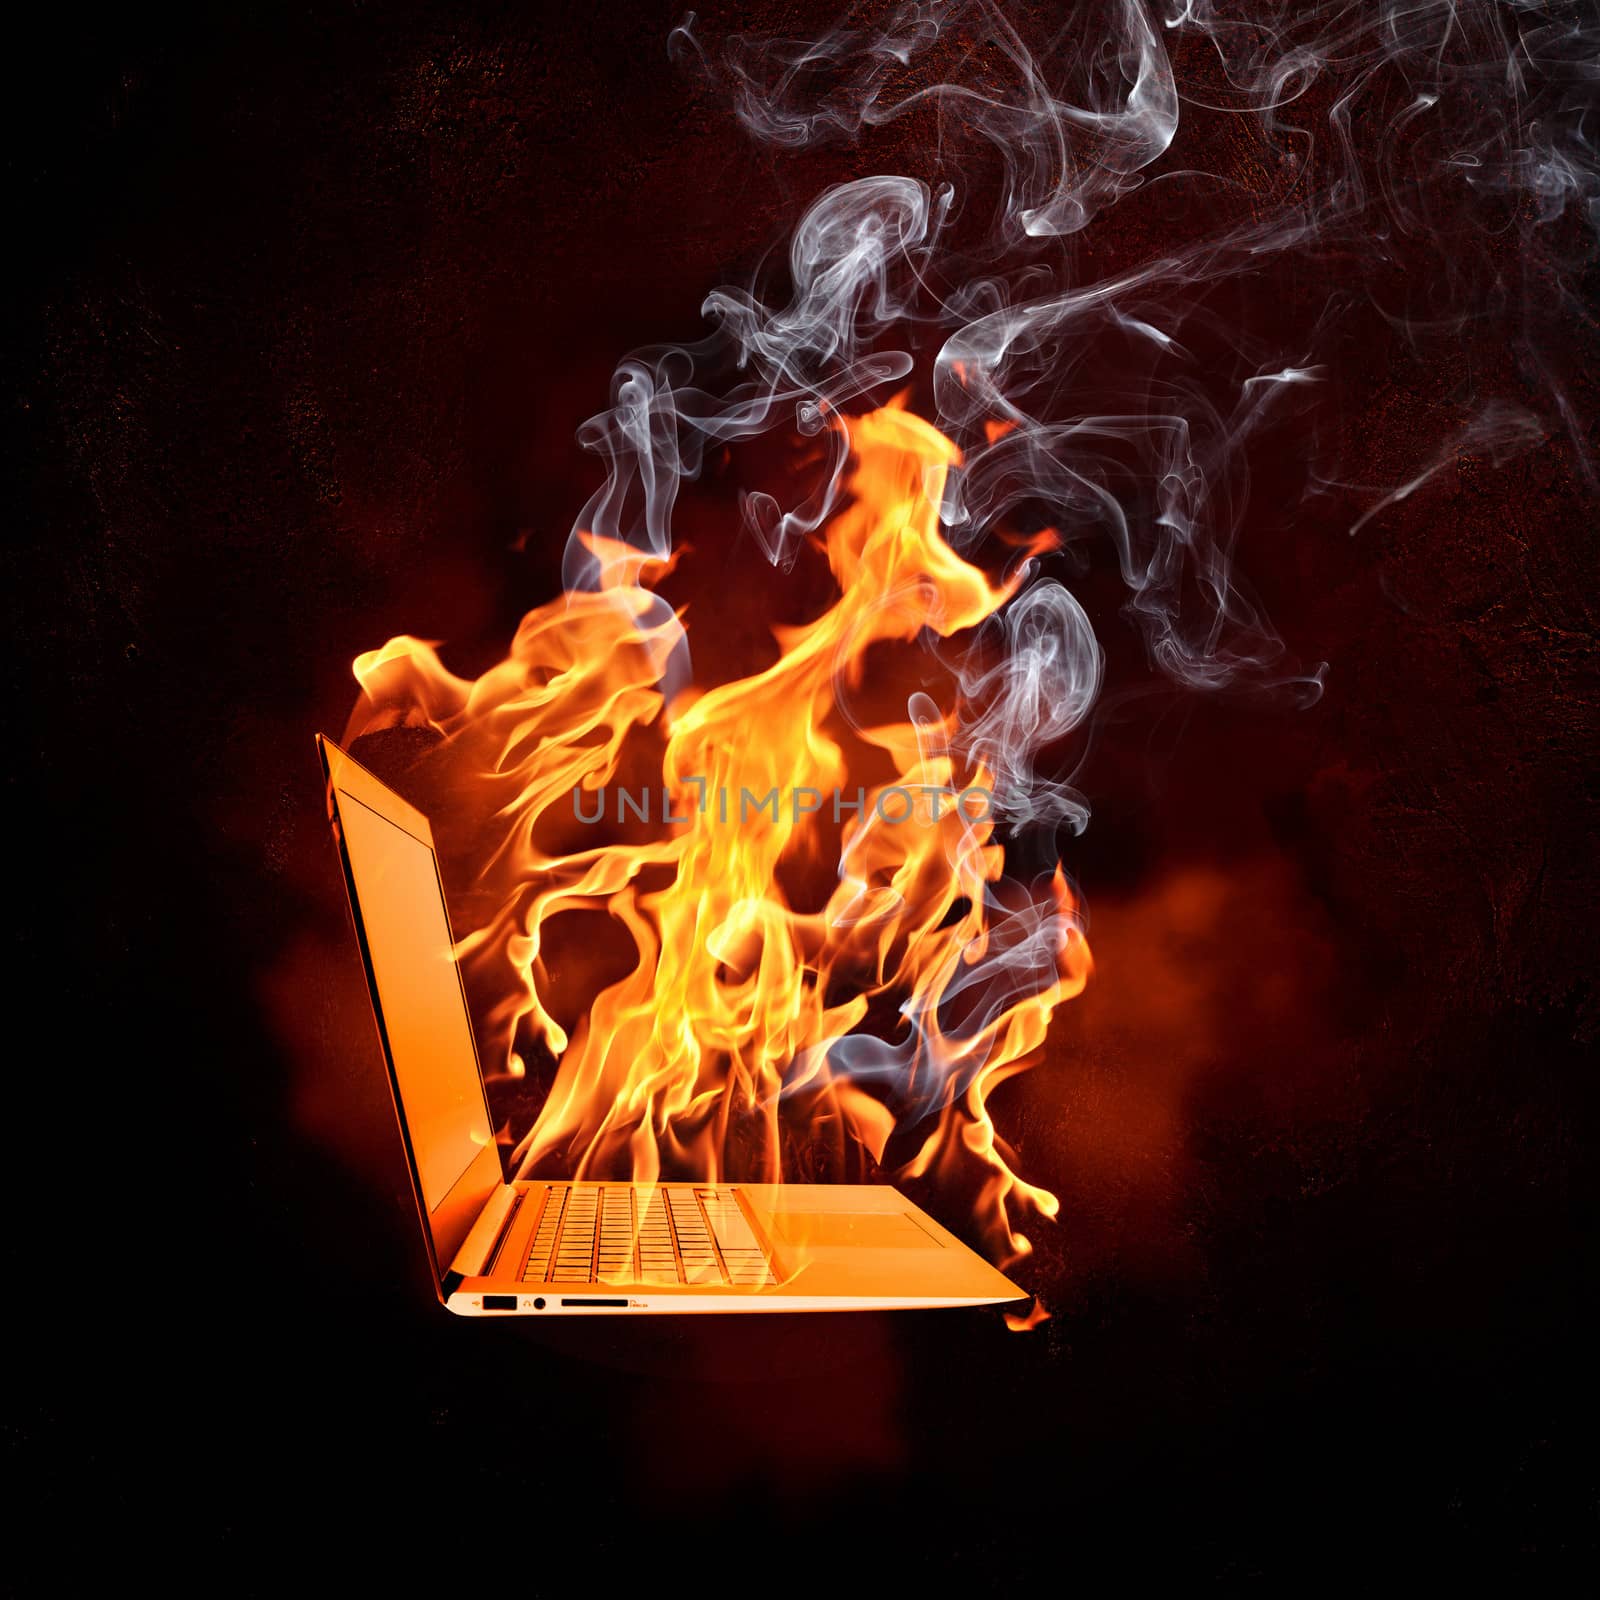 Illustration of burning laptop in fire flames